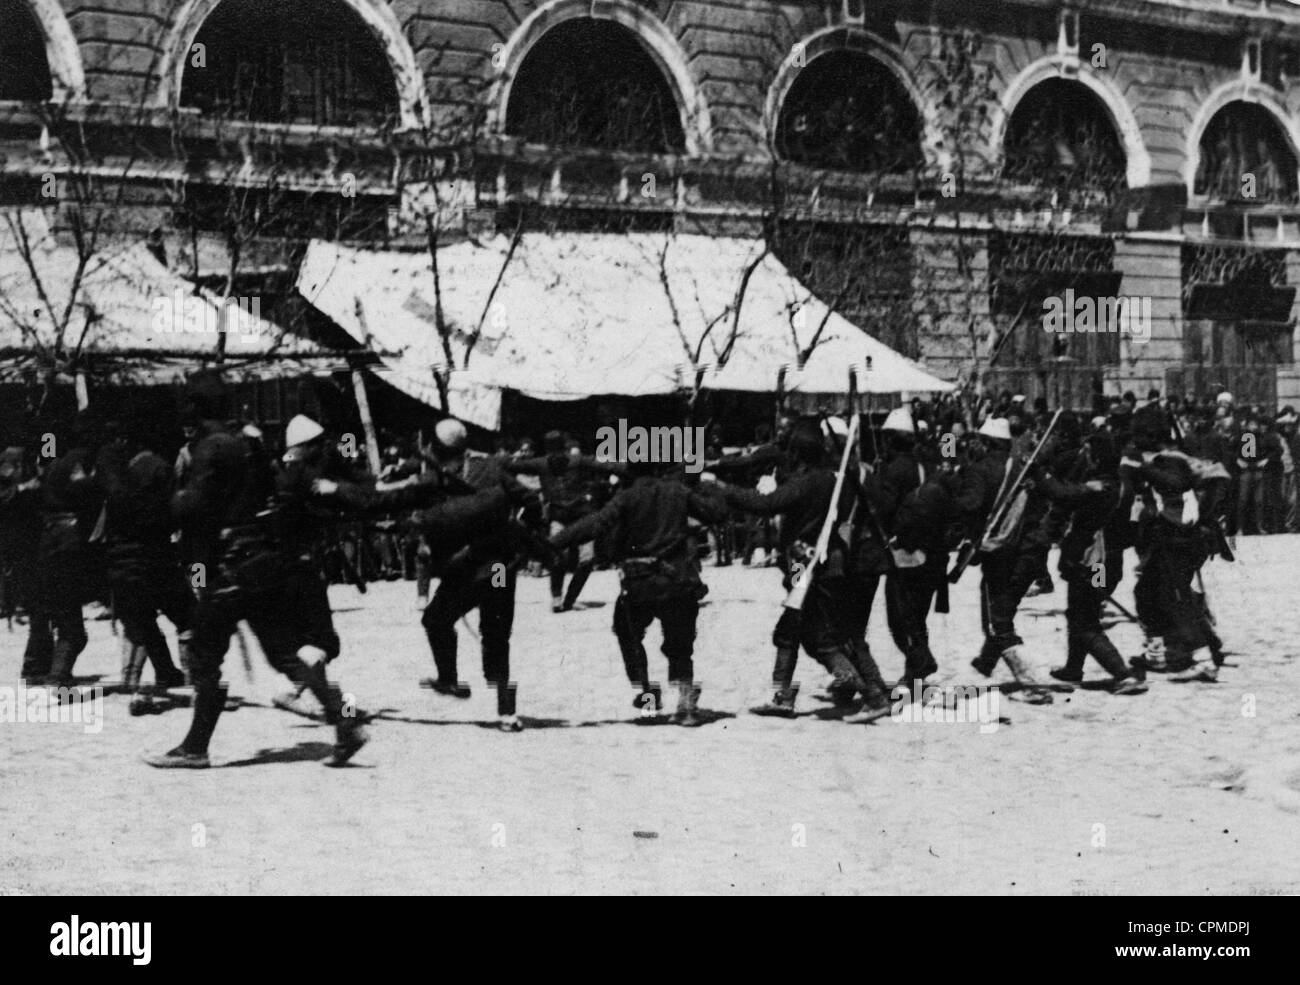 The troops of the Young Turks in Constantinople, 1909 Stock Photo